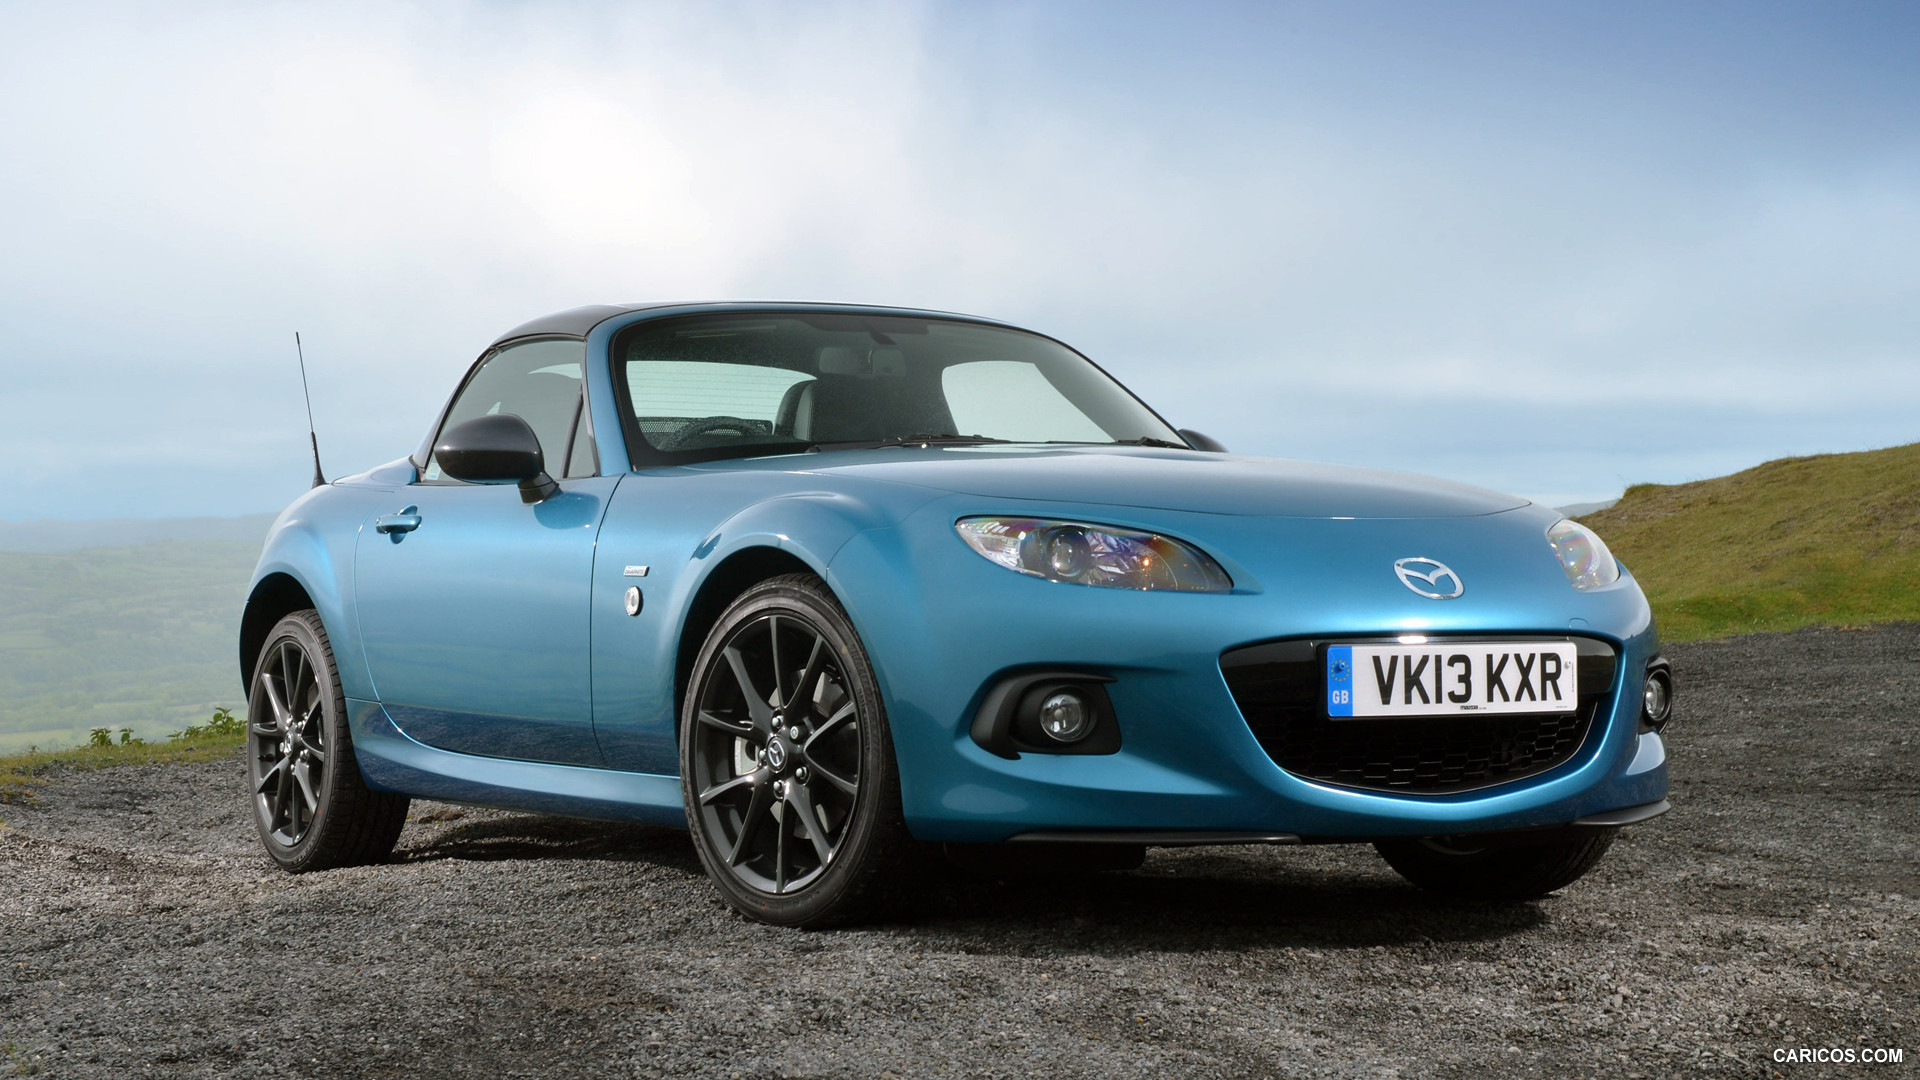 2013 Mazda MX-5 Sport Graphite Limited Edition  - Front, #4 of 8